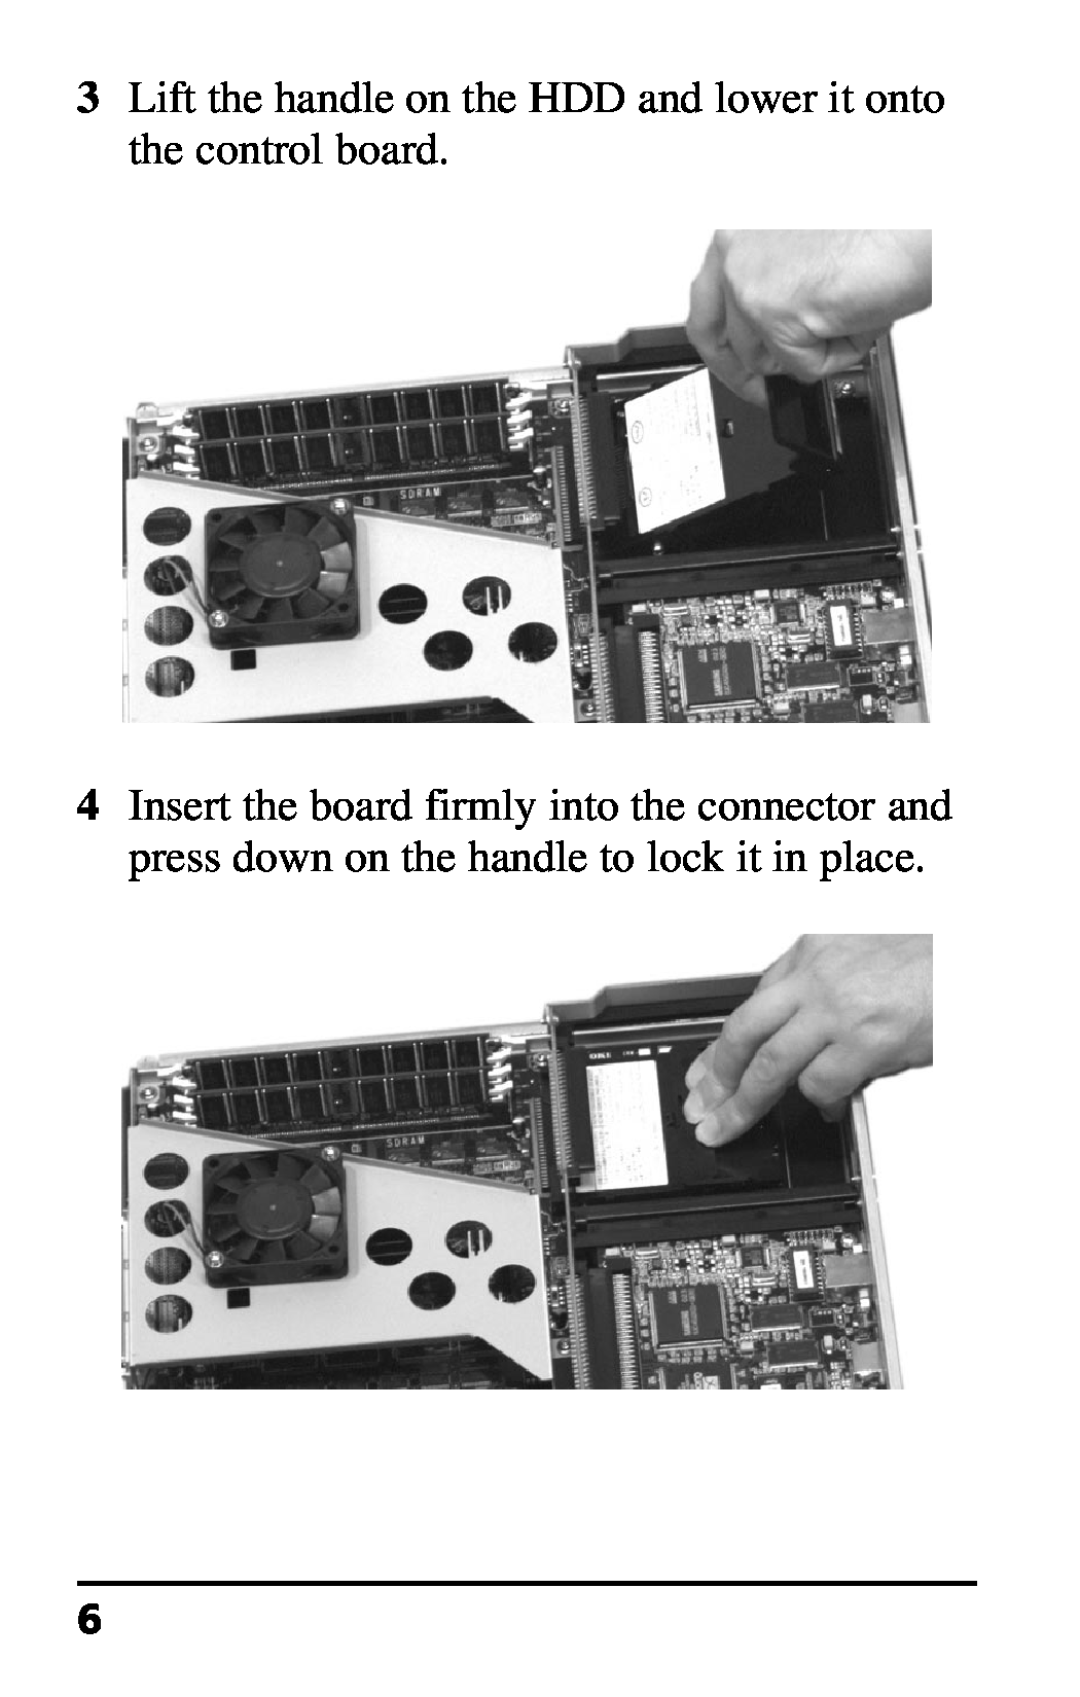 Oki 70037301 installation instructions Lift the handle on the HDD and lower it onto the control board 